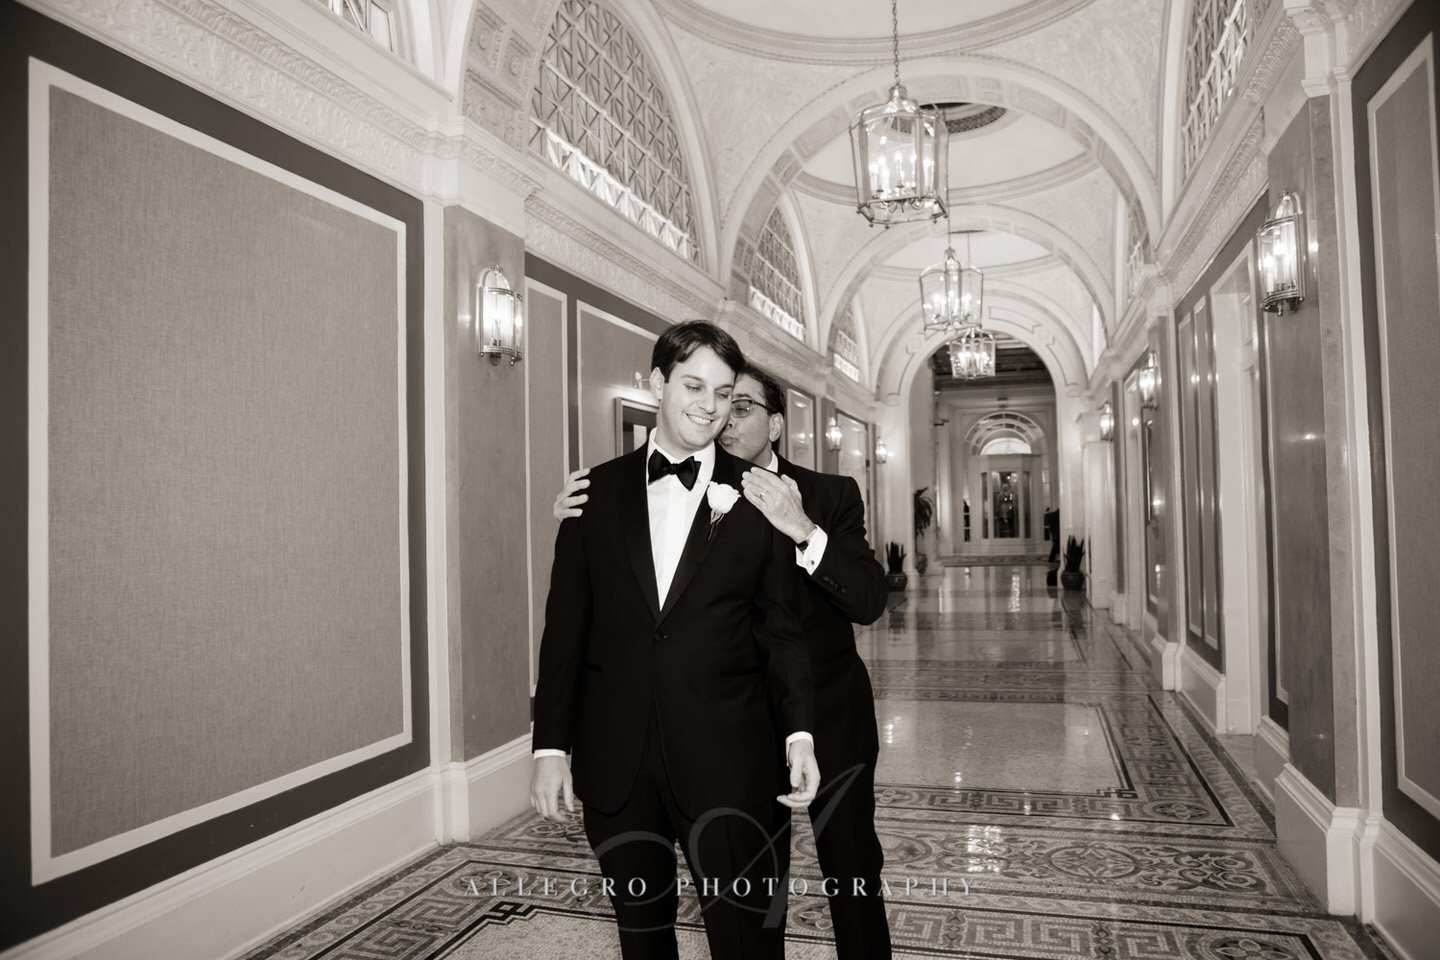 first look - fairmont copley plaza wedding photo by Allegro Photography